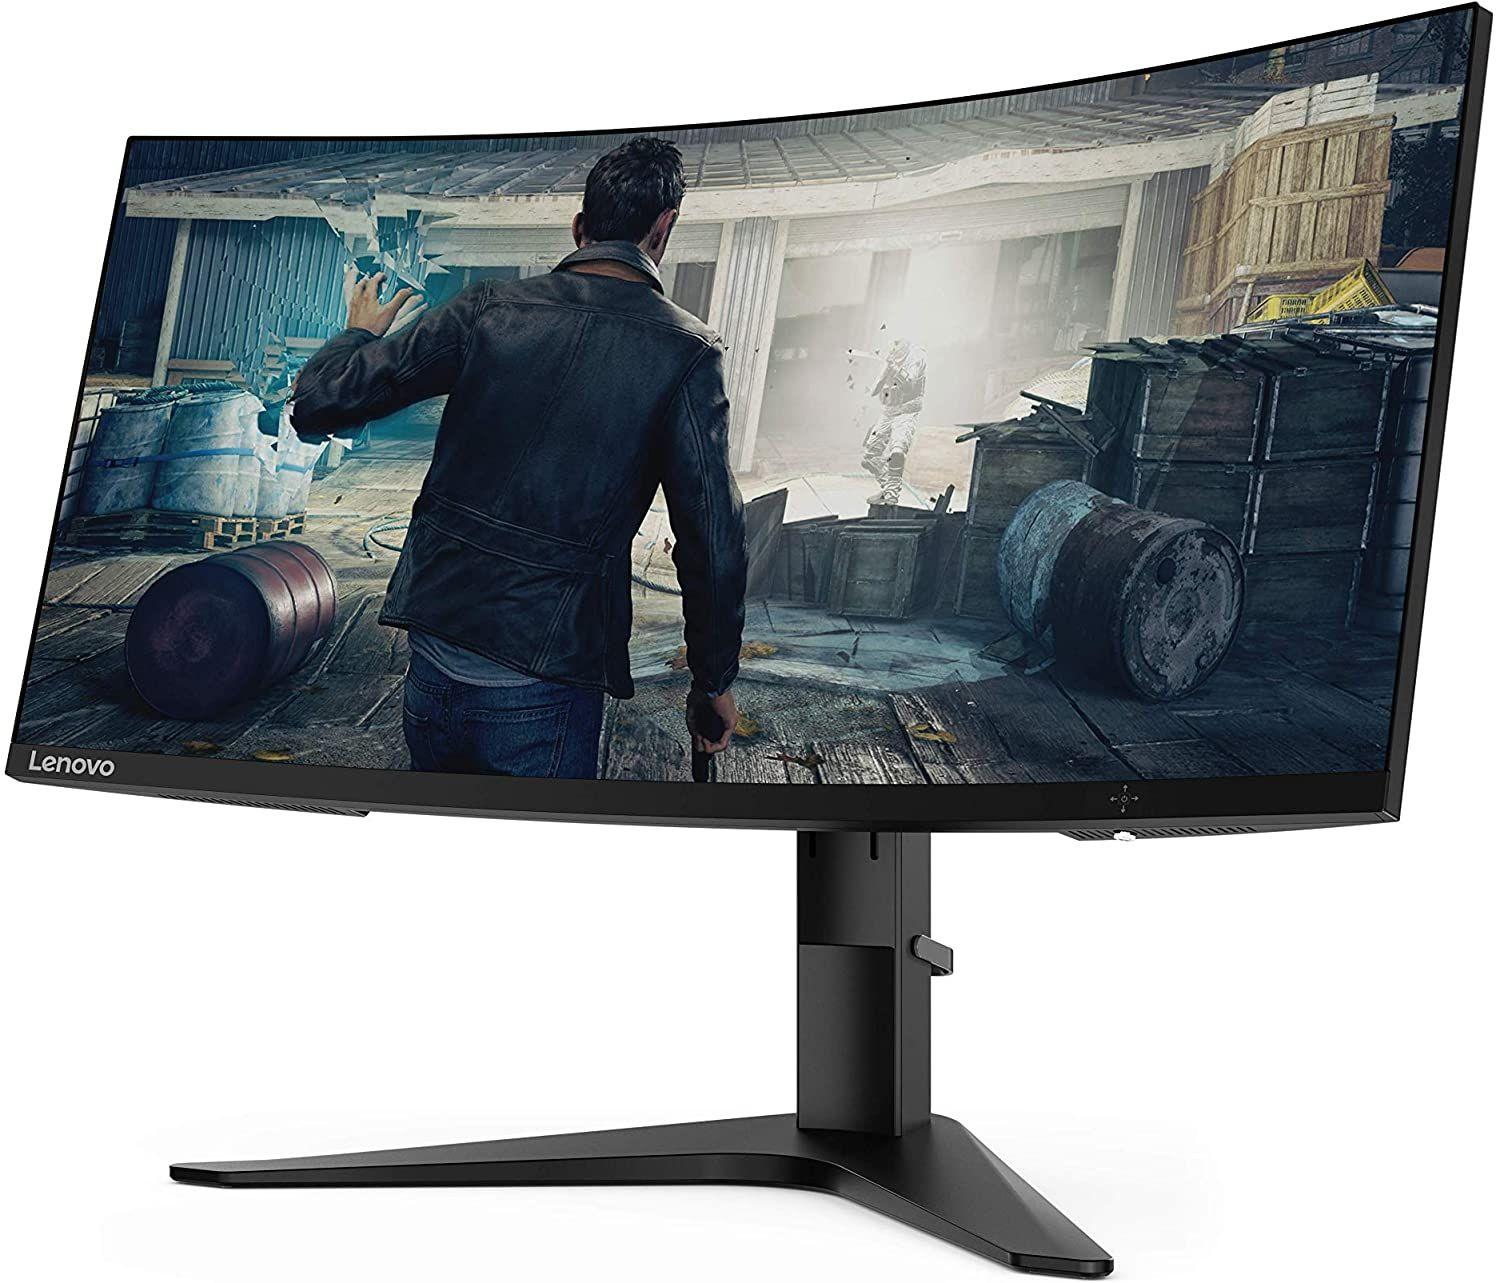 34in Lenovo G34w Curved Ultrawide Gaming Monitor for $278.10 Shipped